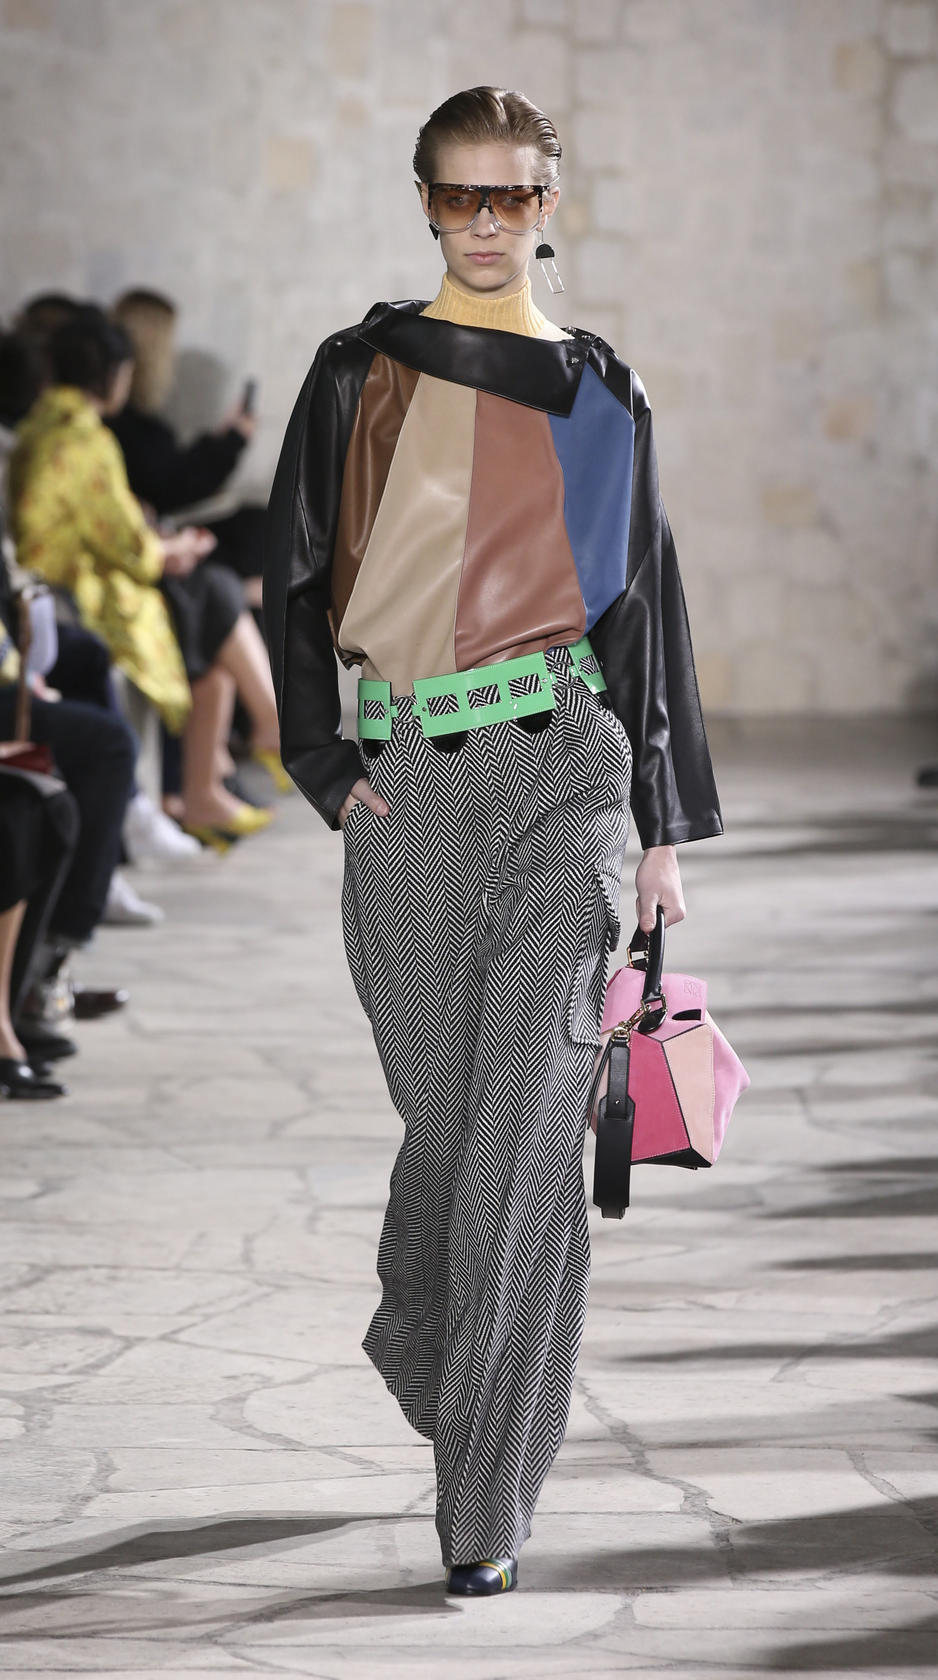 First Loewe collection by Jonathan Anderson - LVMH